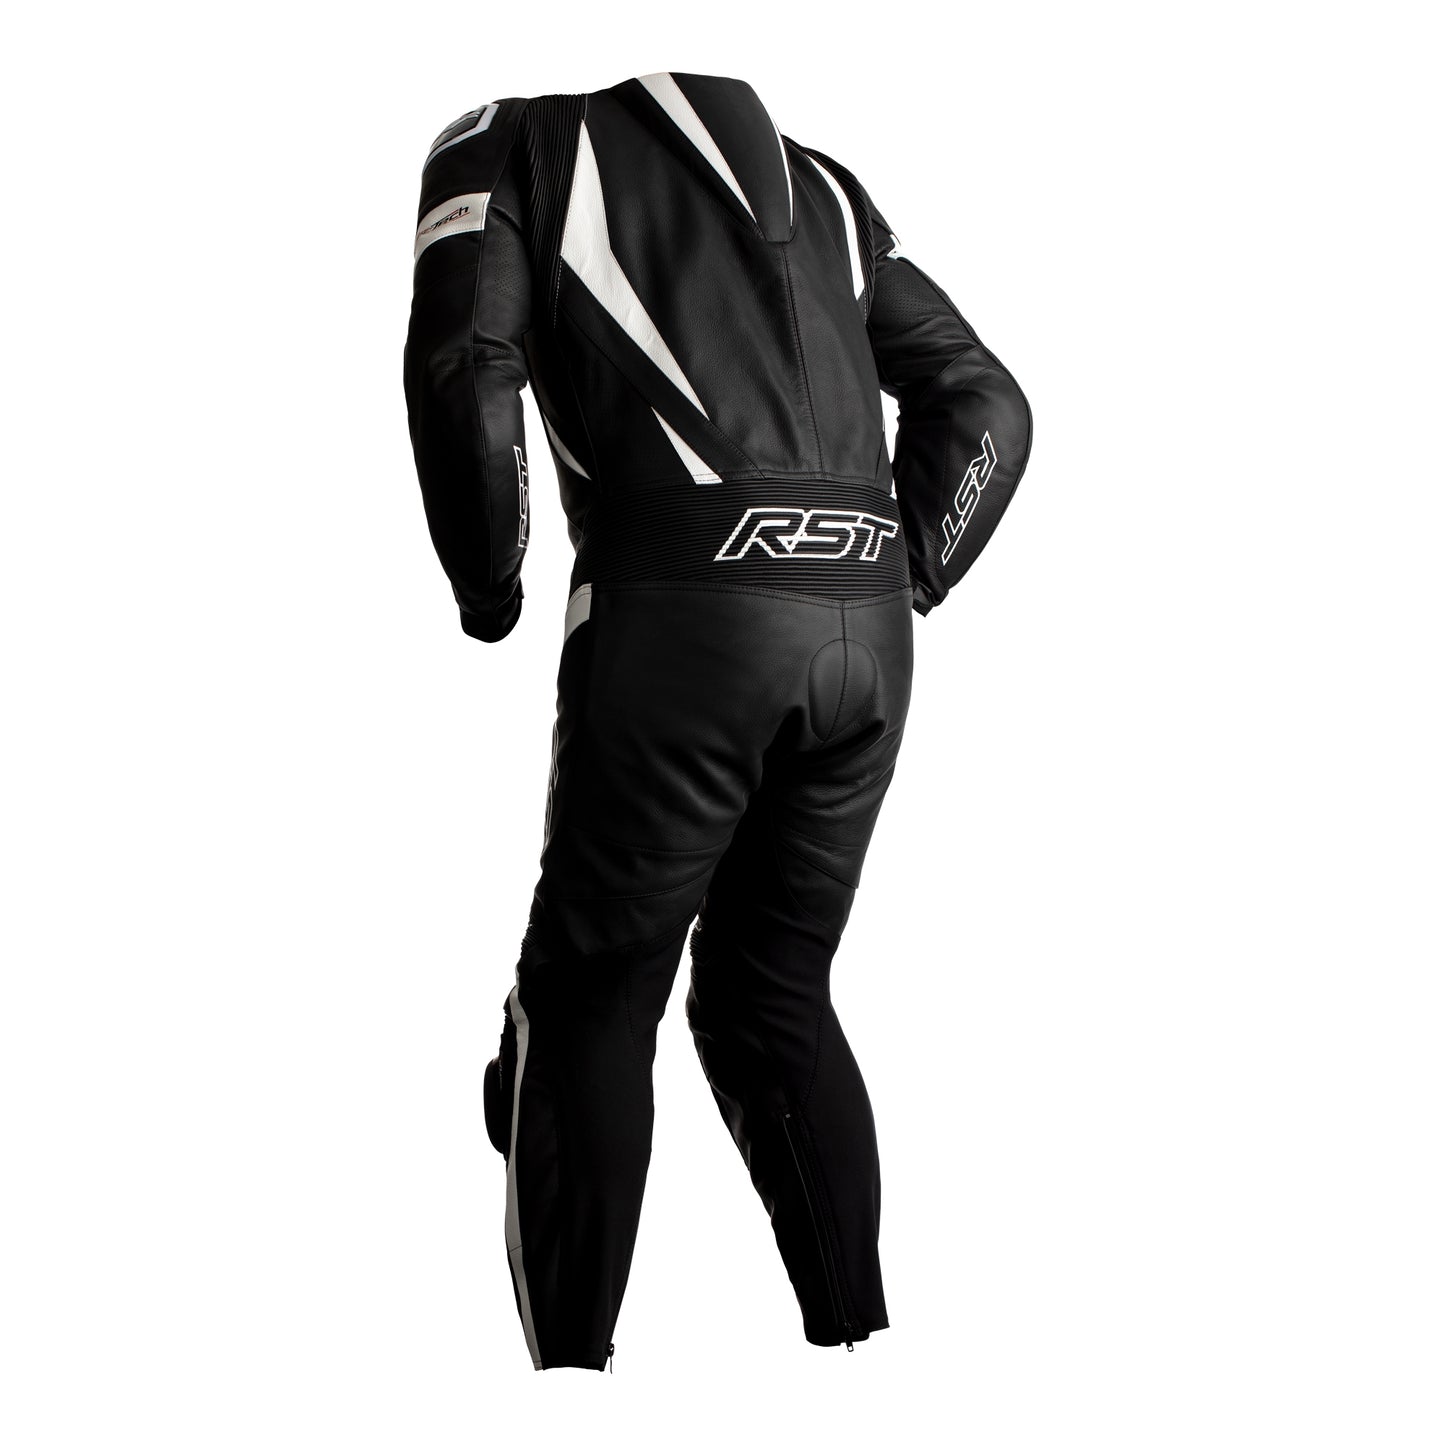 RST Tractech Evo 4 Youth (CE) 1 Piece Leather Suit - Black/White